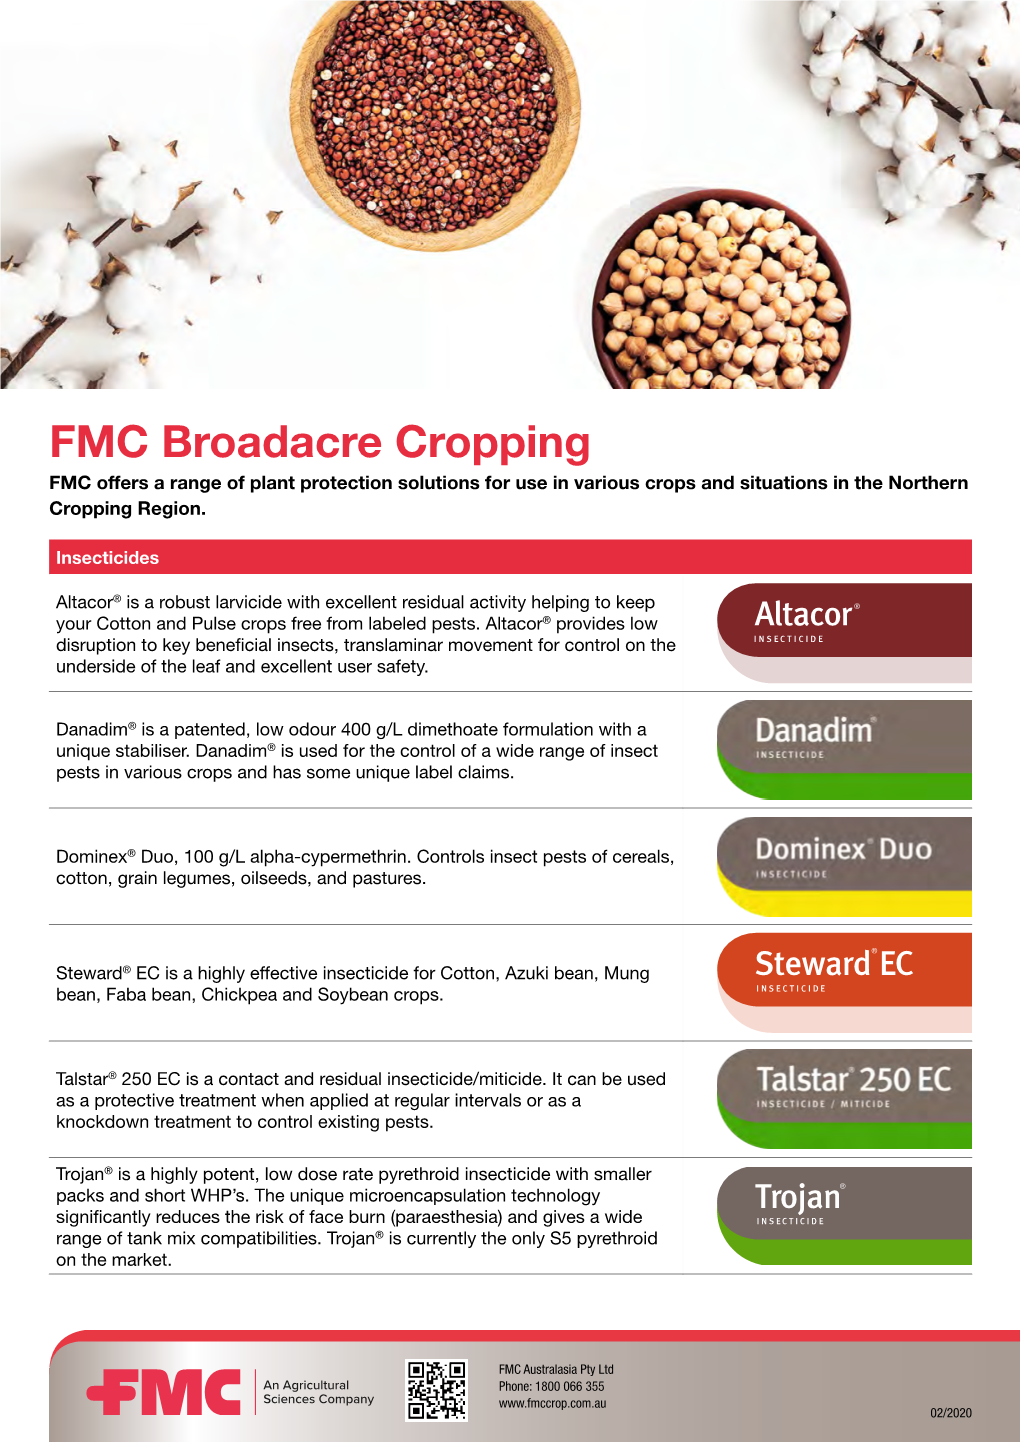 FMC Broadacre Cropping FMC Offers a Range of Plant Protection Solutions for Use in Various Crops and Situations in the Northern Cropping Region